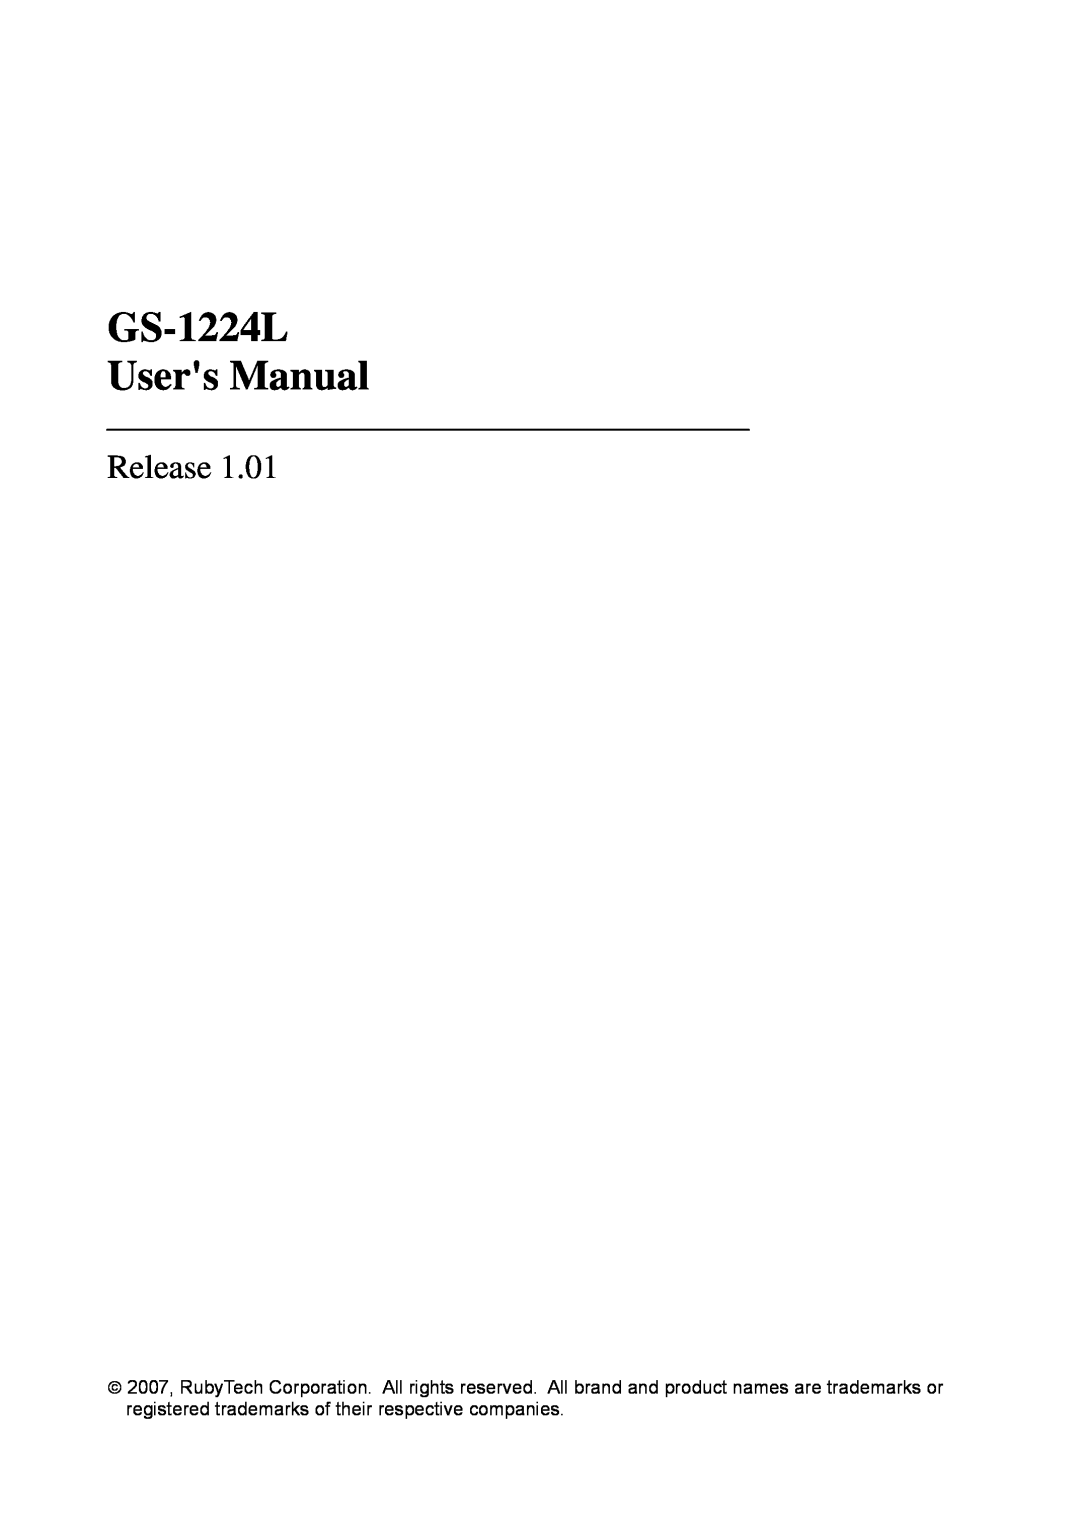 Ruby Tech manual GS-1224L Users Manual, Release 